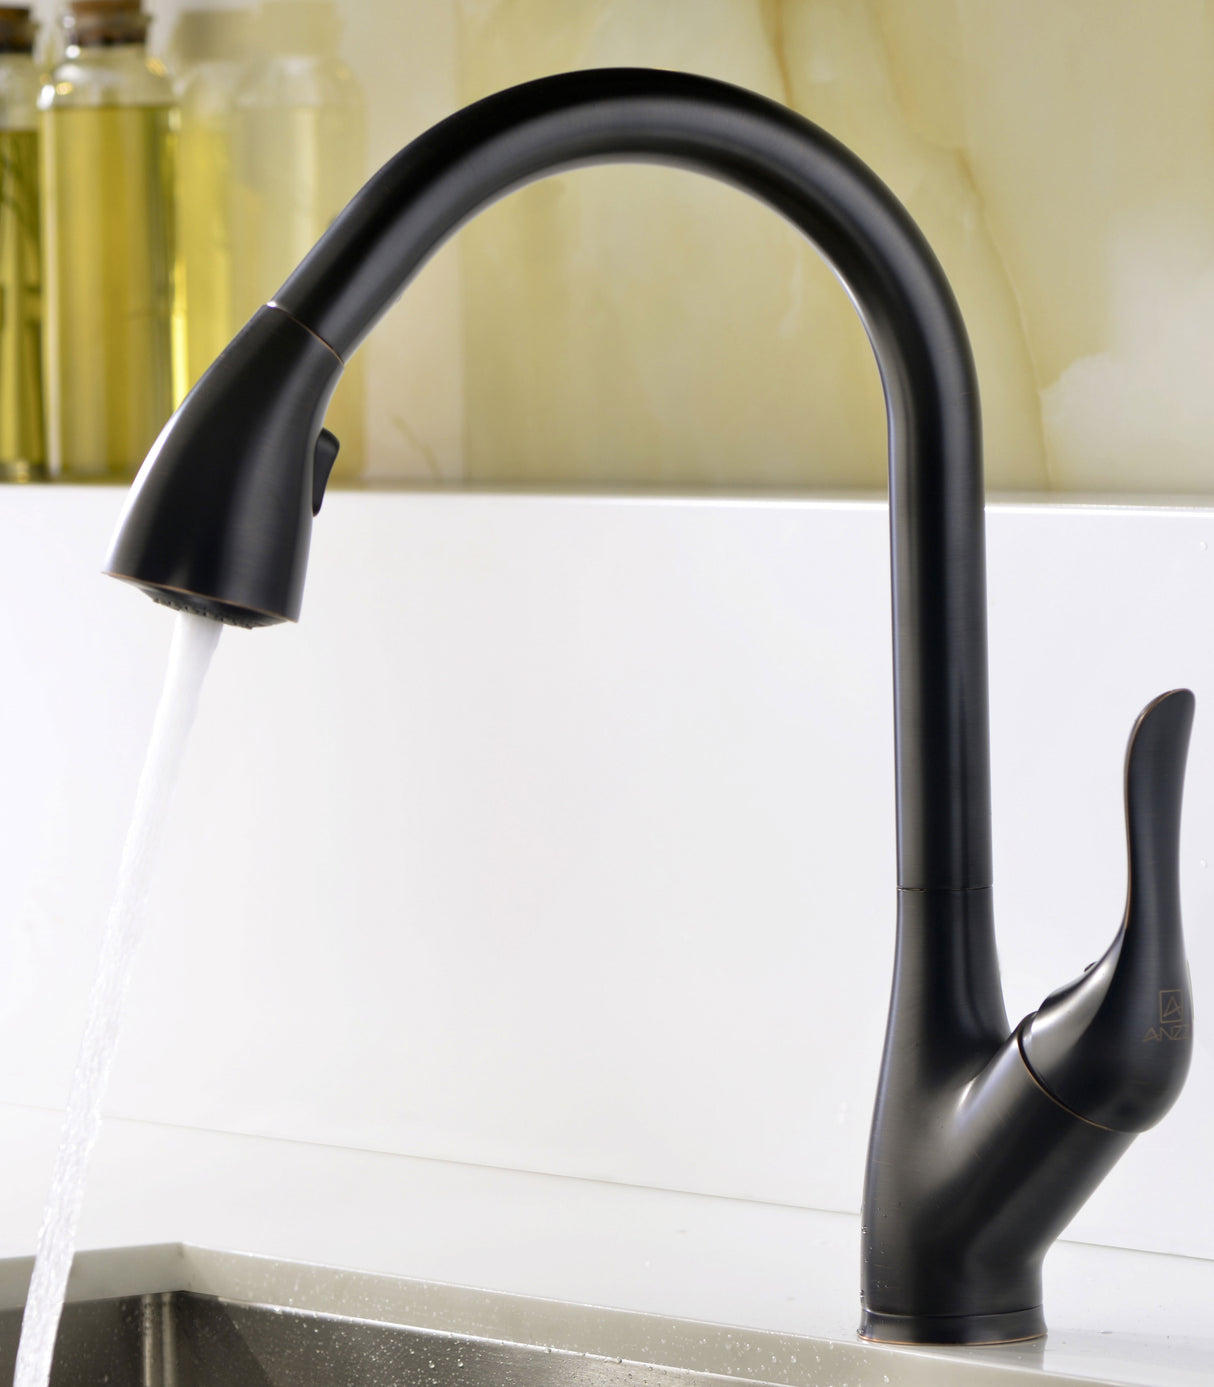 ANZZI K33201A-031O Elysian Farmhouse 32 in. Kitchen Sink with Accent Faucet in Oil Rubbed Bronze